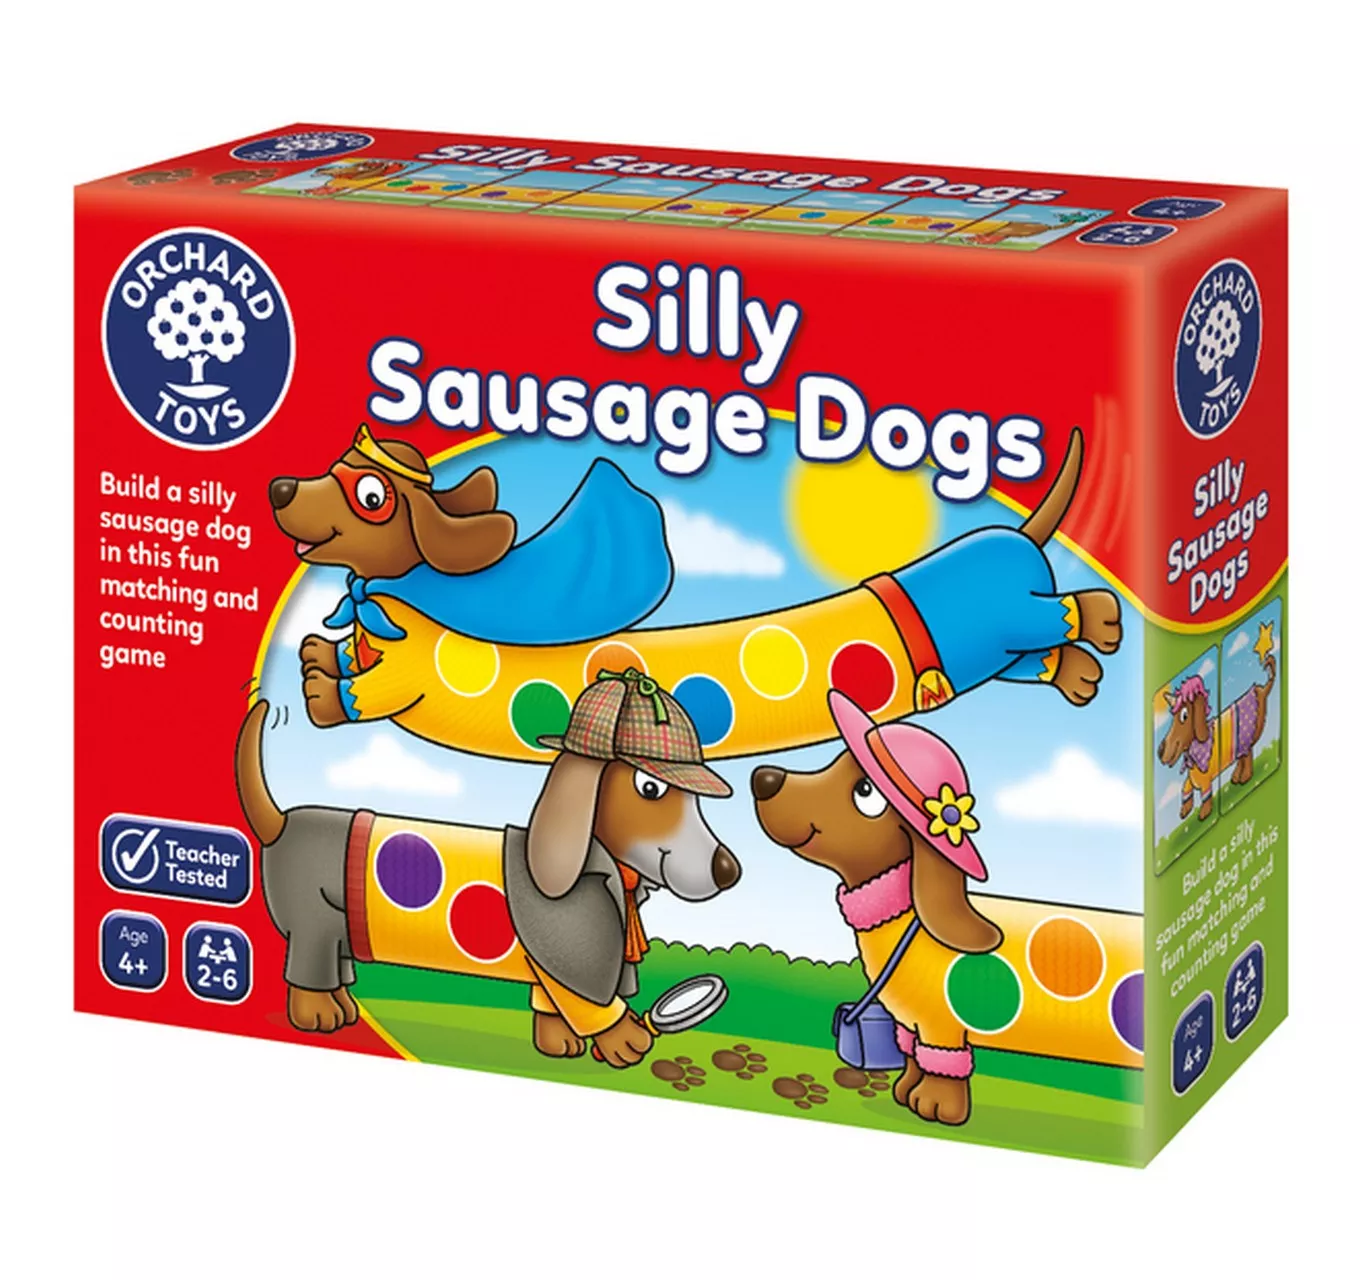 Silly Sausage Dogs Game